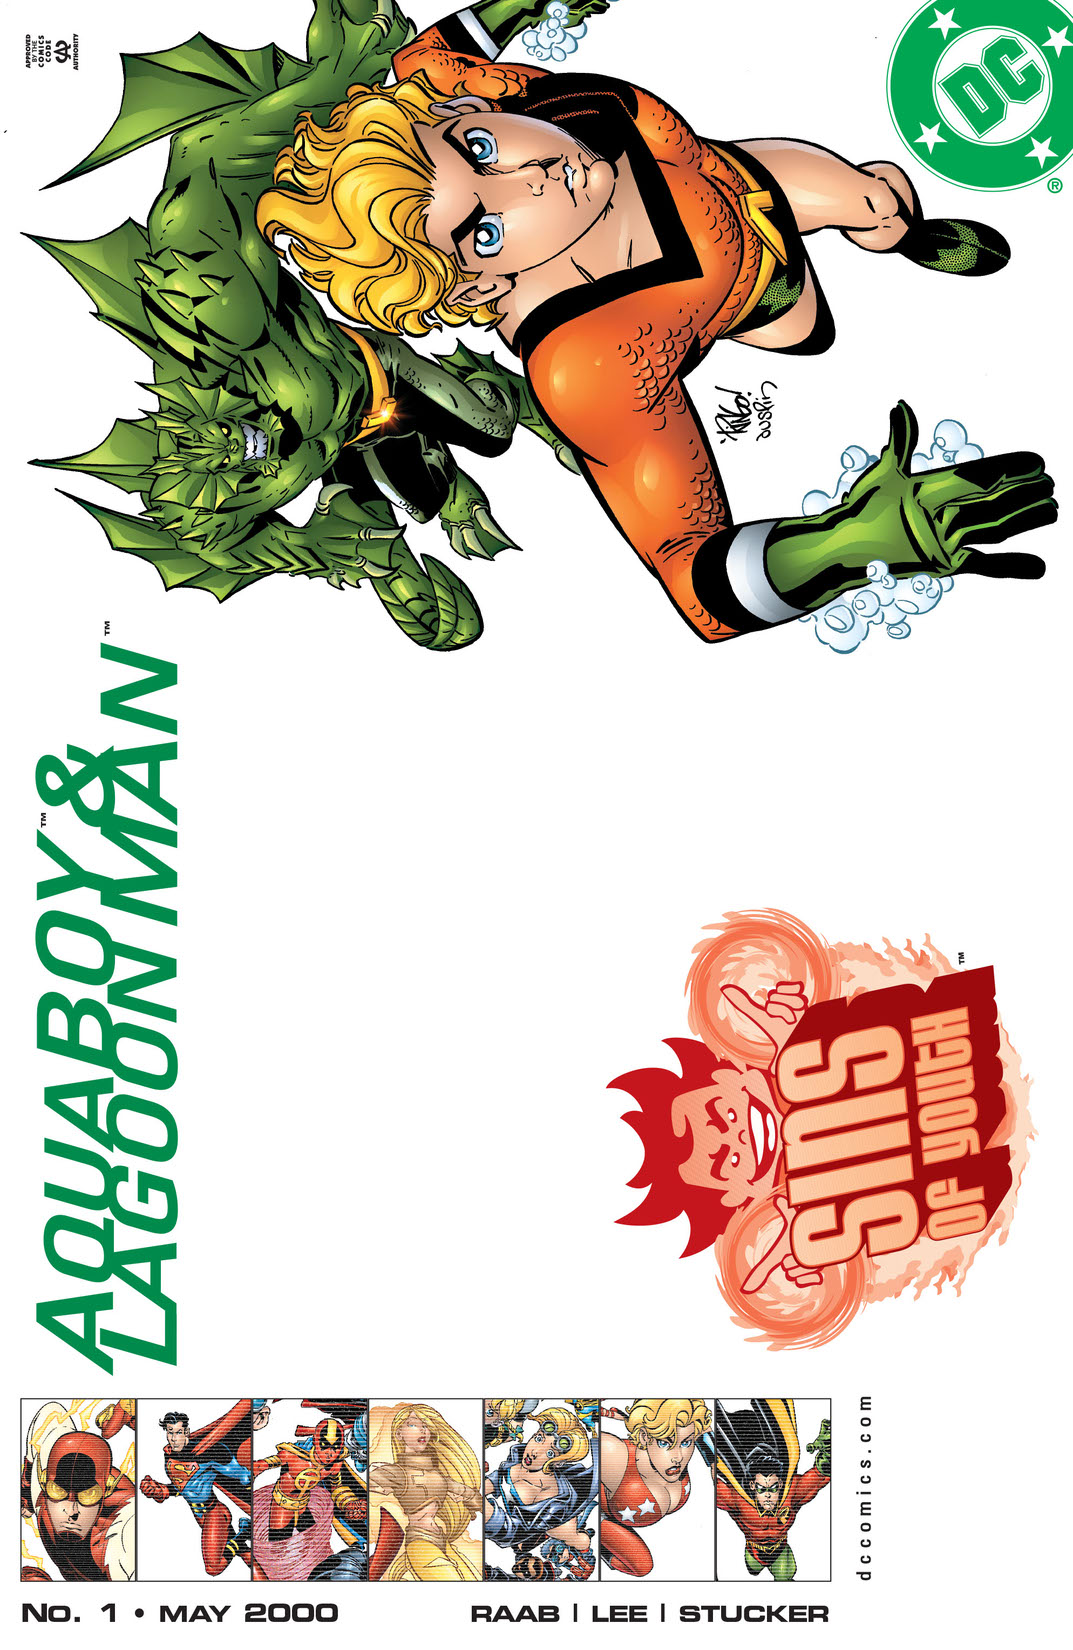 Sins of Youth: Aquaboy/Lagoon Man #1 preview images